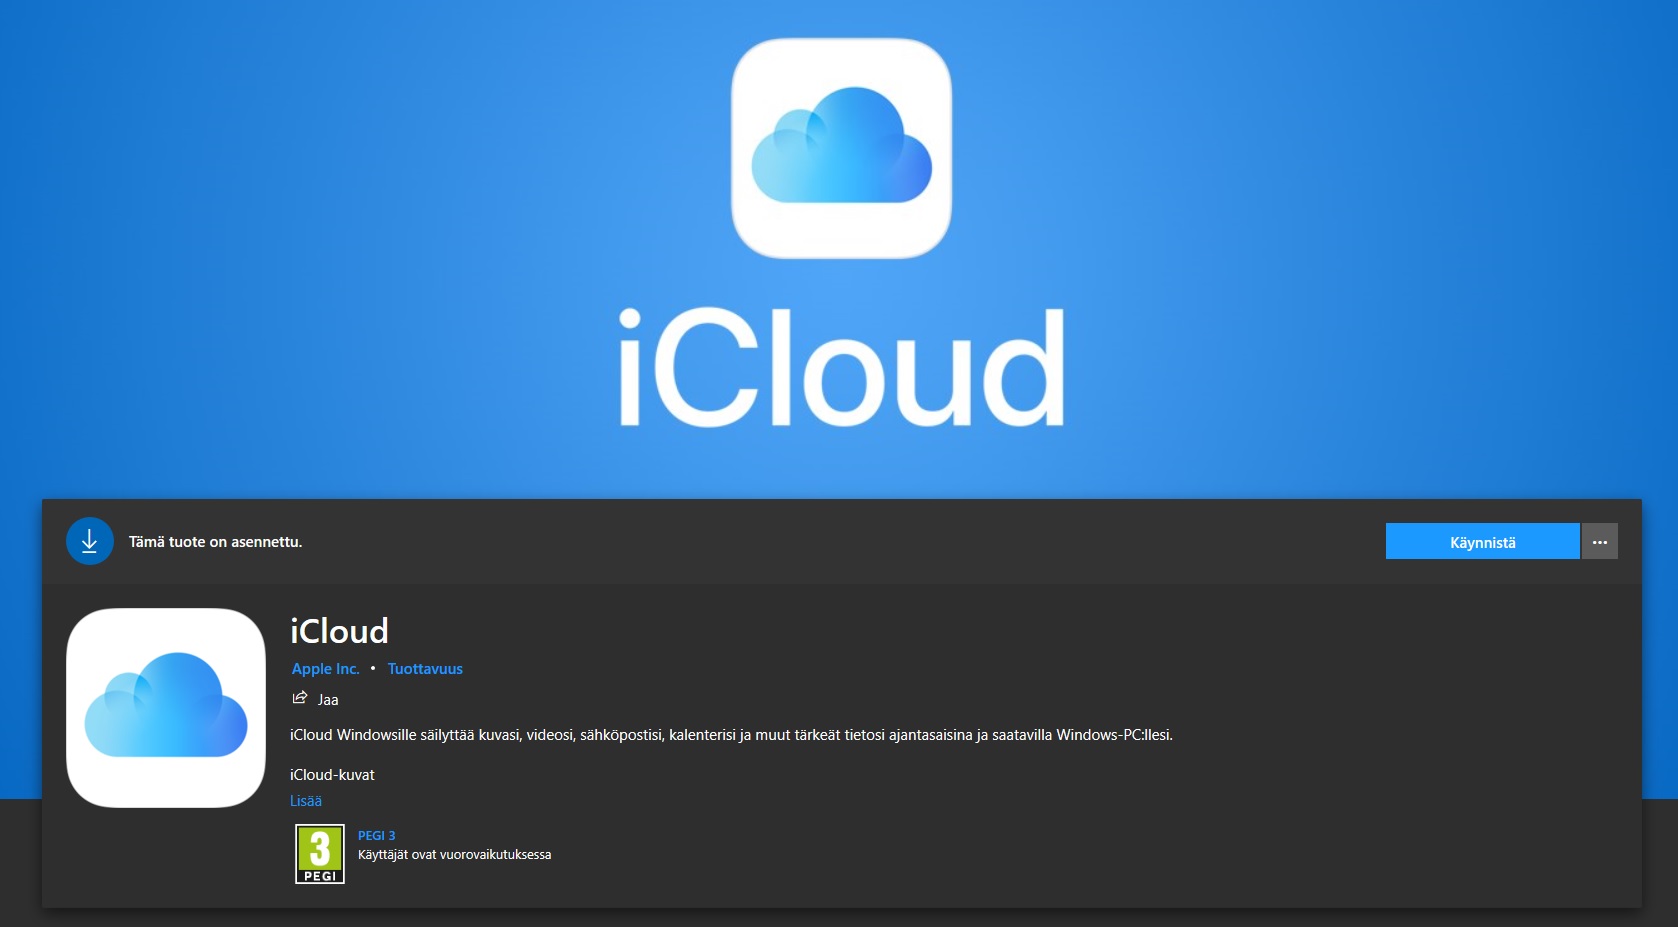 download icloud for windows 10 not from microsoft store